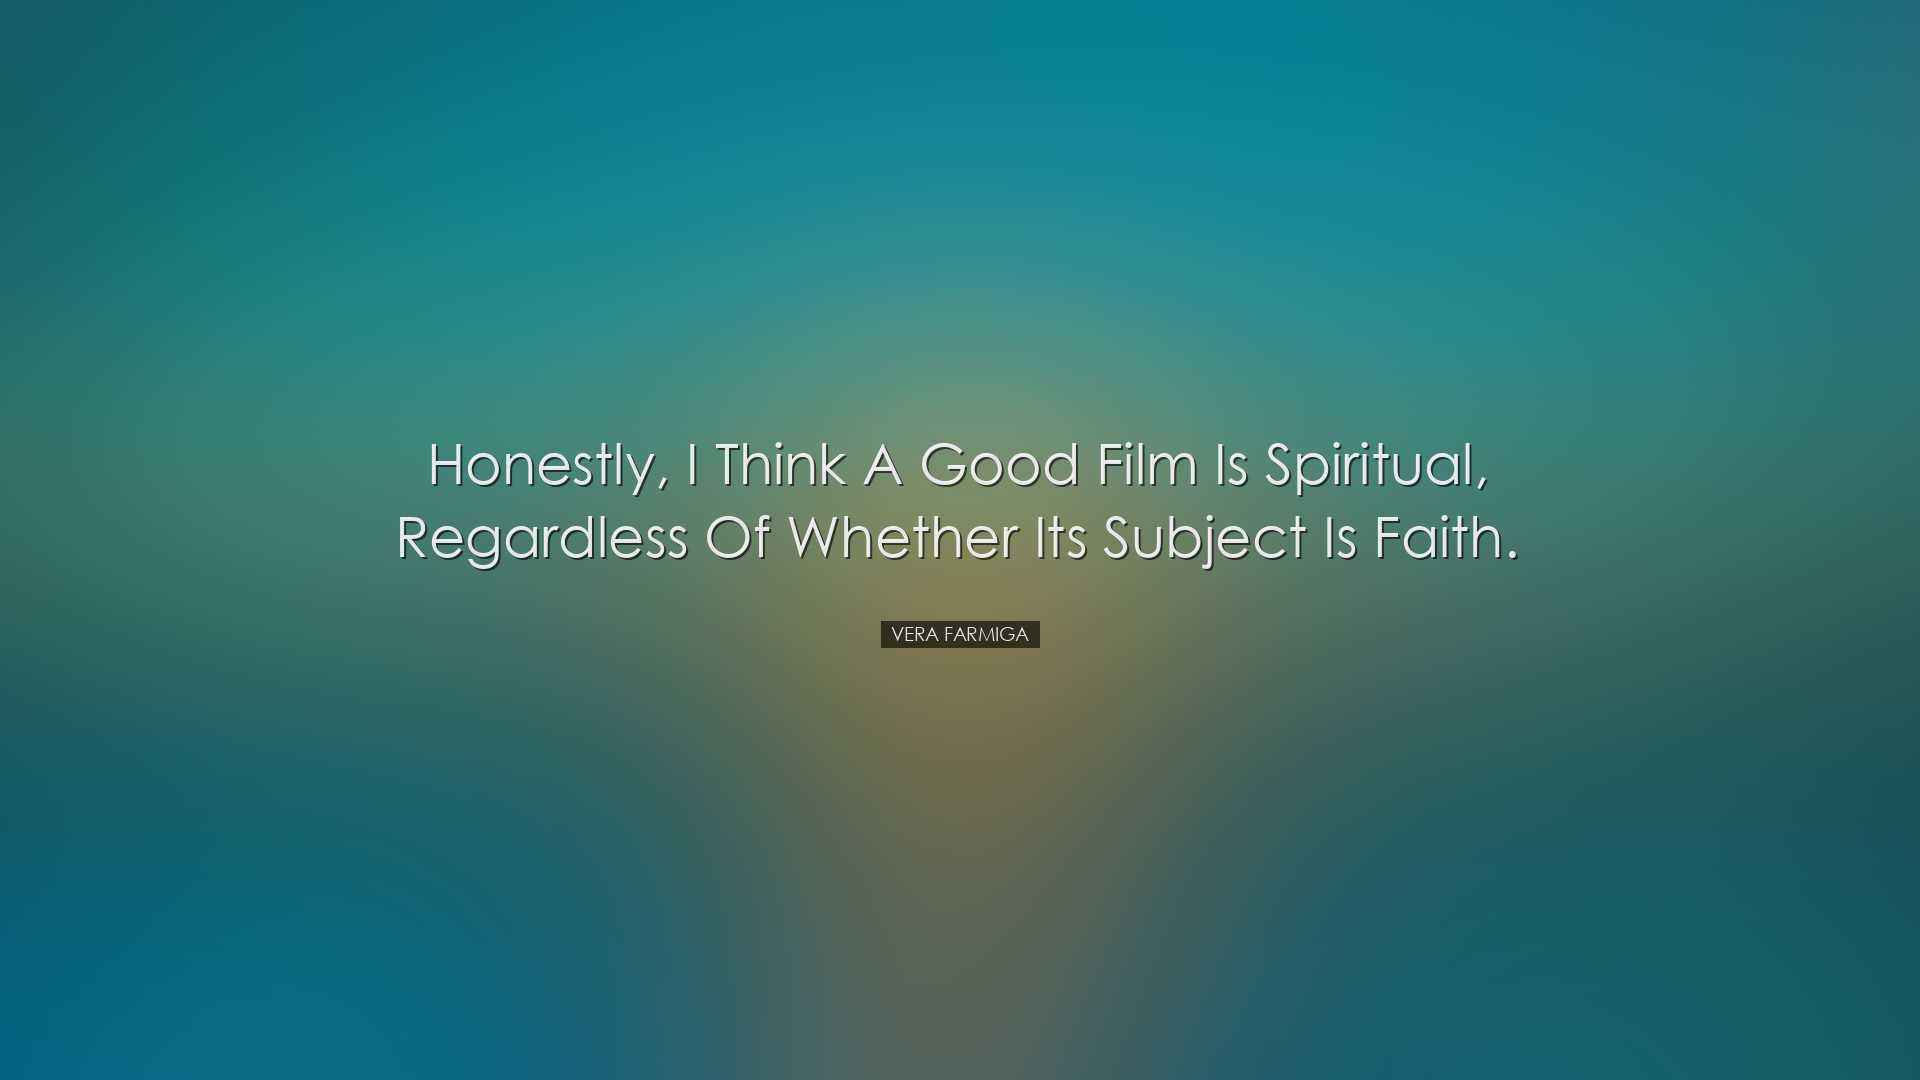 Honestly, I think a good film is spiritual, regardless of whether